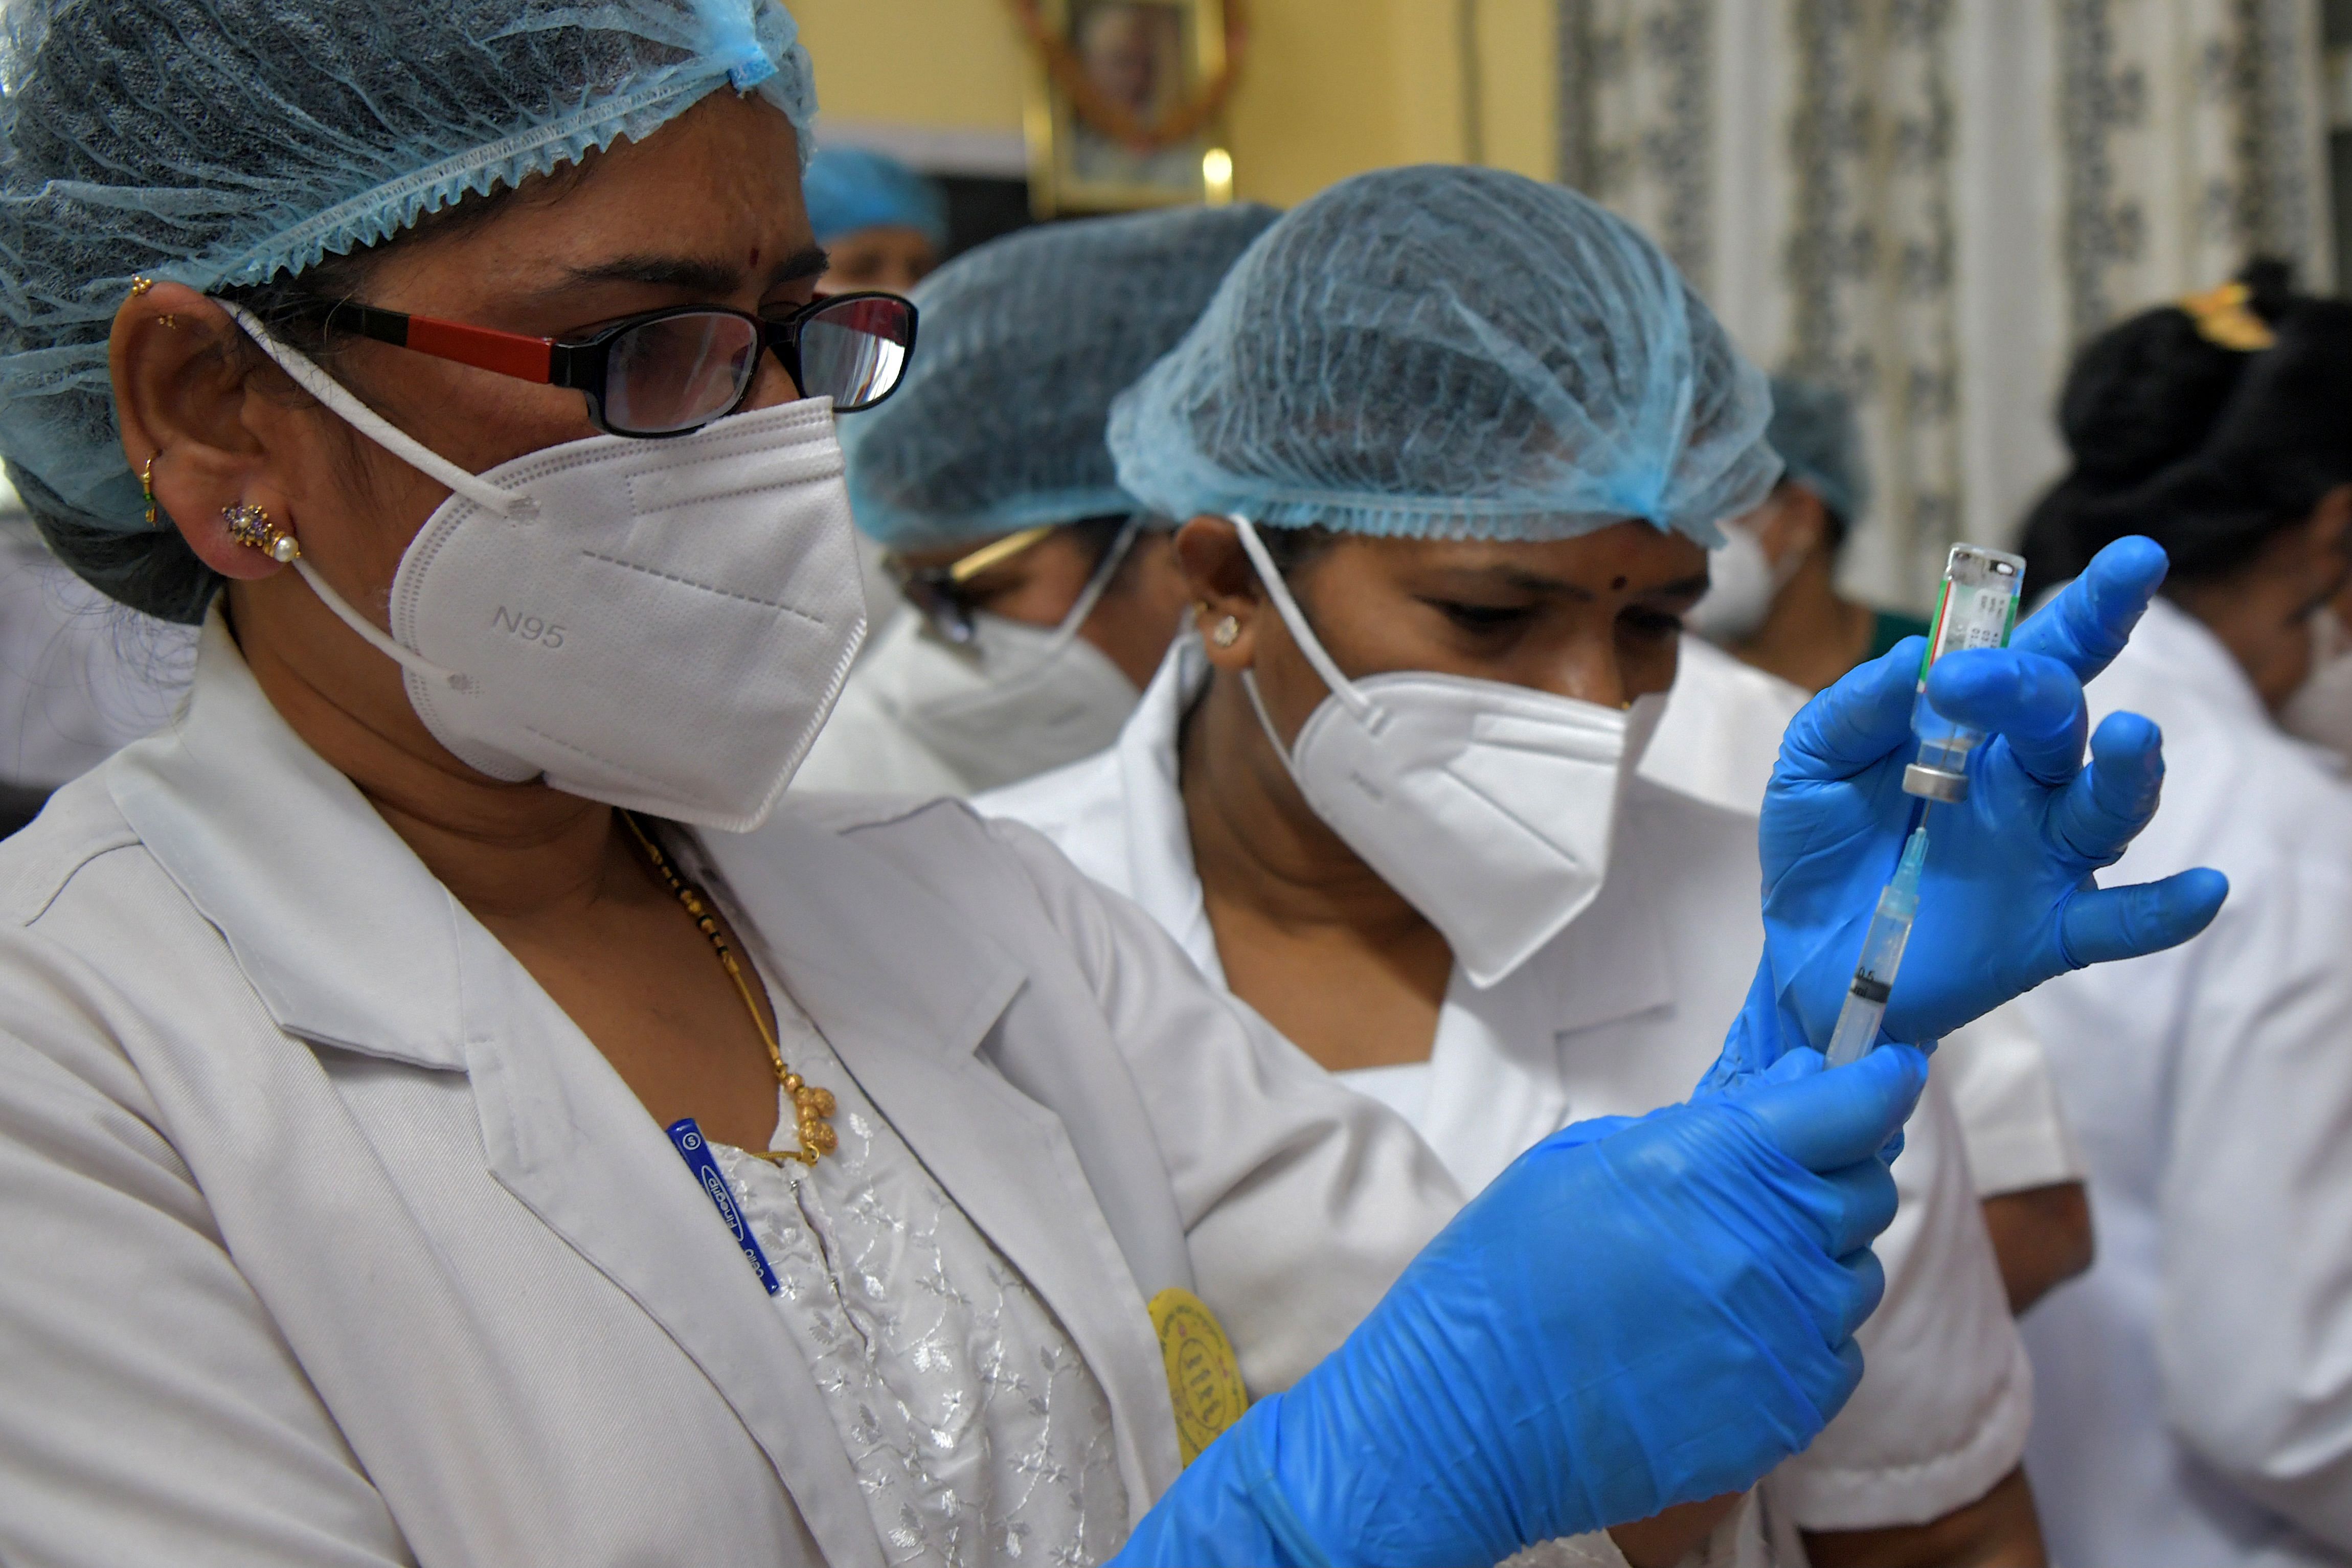 A nurse draws the CoviShield vaccine from a vial to inject a health worker during the Covid-19 coronavirus vaccination drive at the KC General hospital in Bangalore on January 16, 2021. Credit: AFP Photo